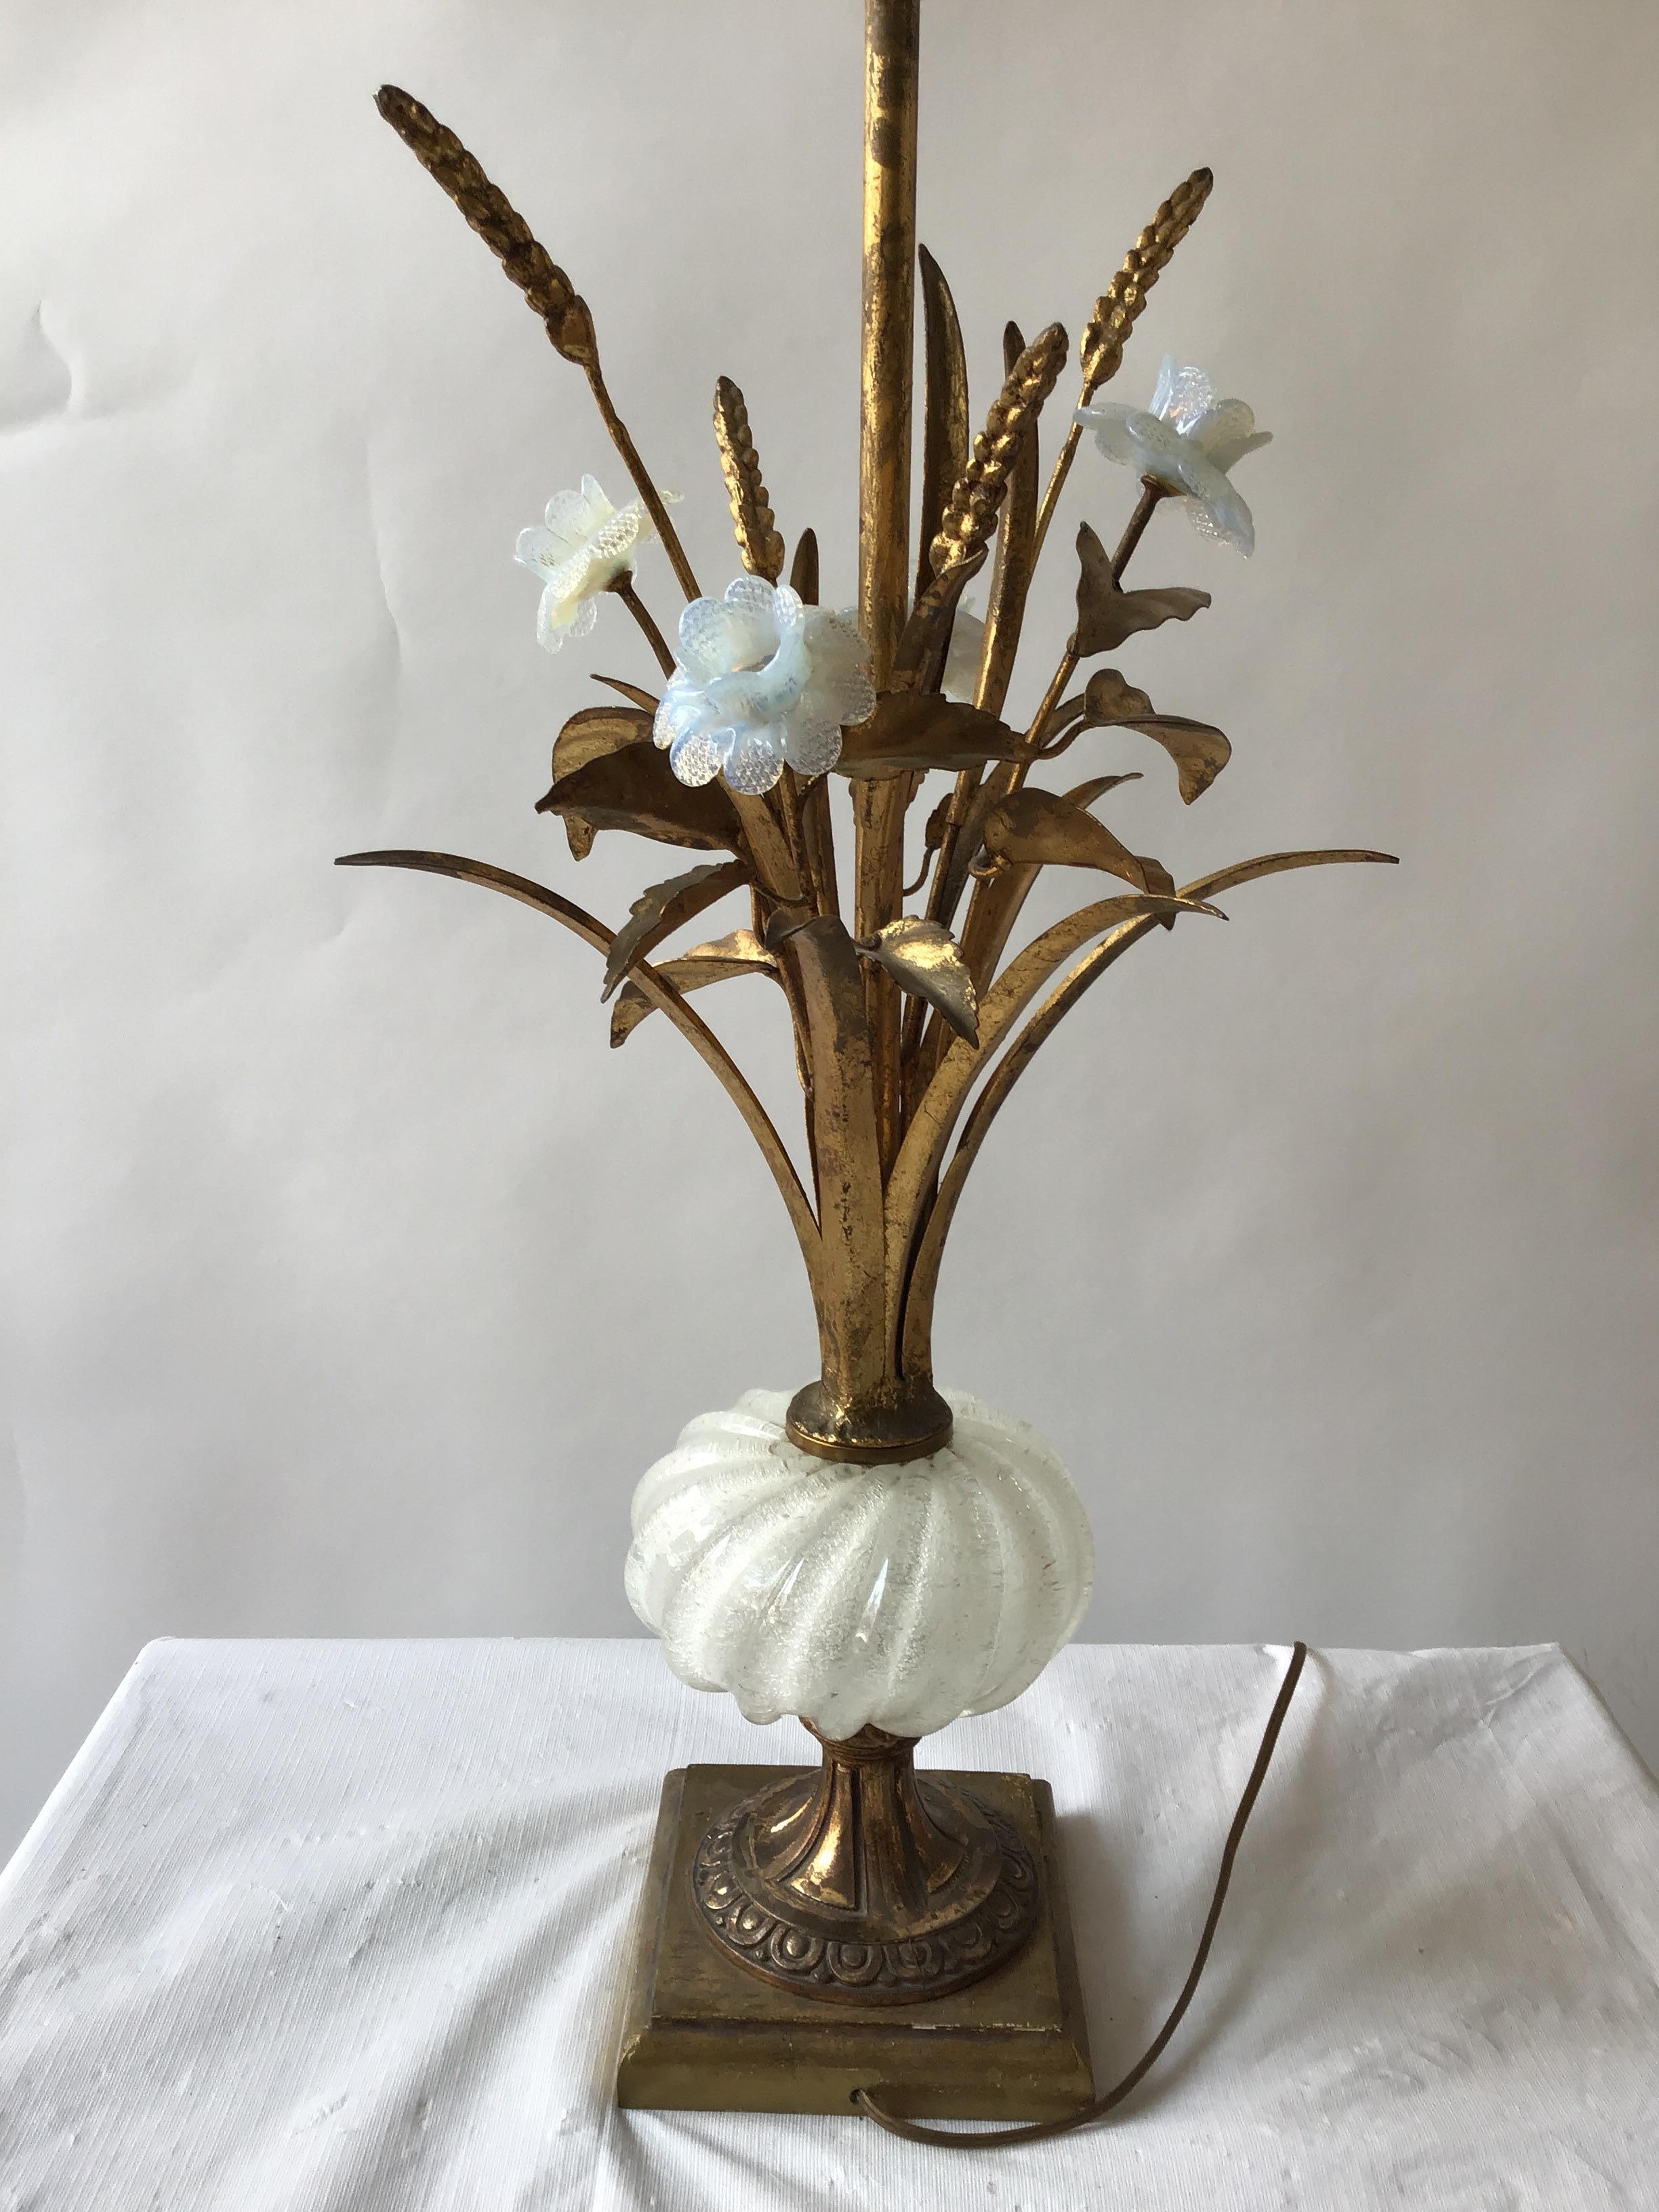 1950s Murano glass floral table lamp. Giltwood base, gilt metal leaves, marked made in Italy.